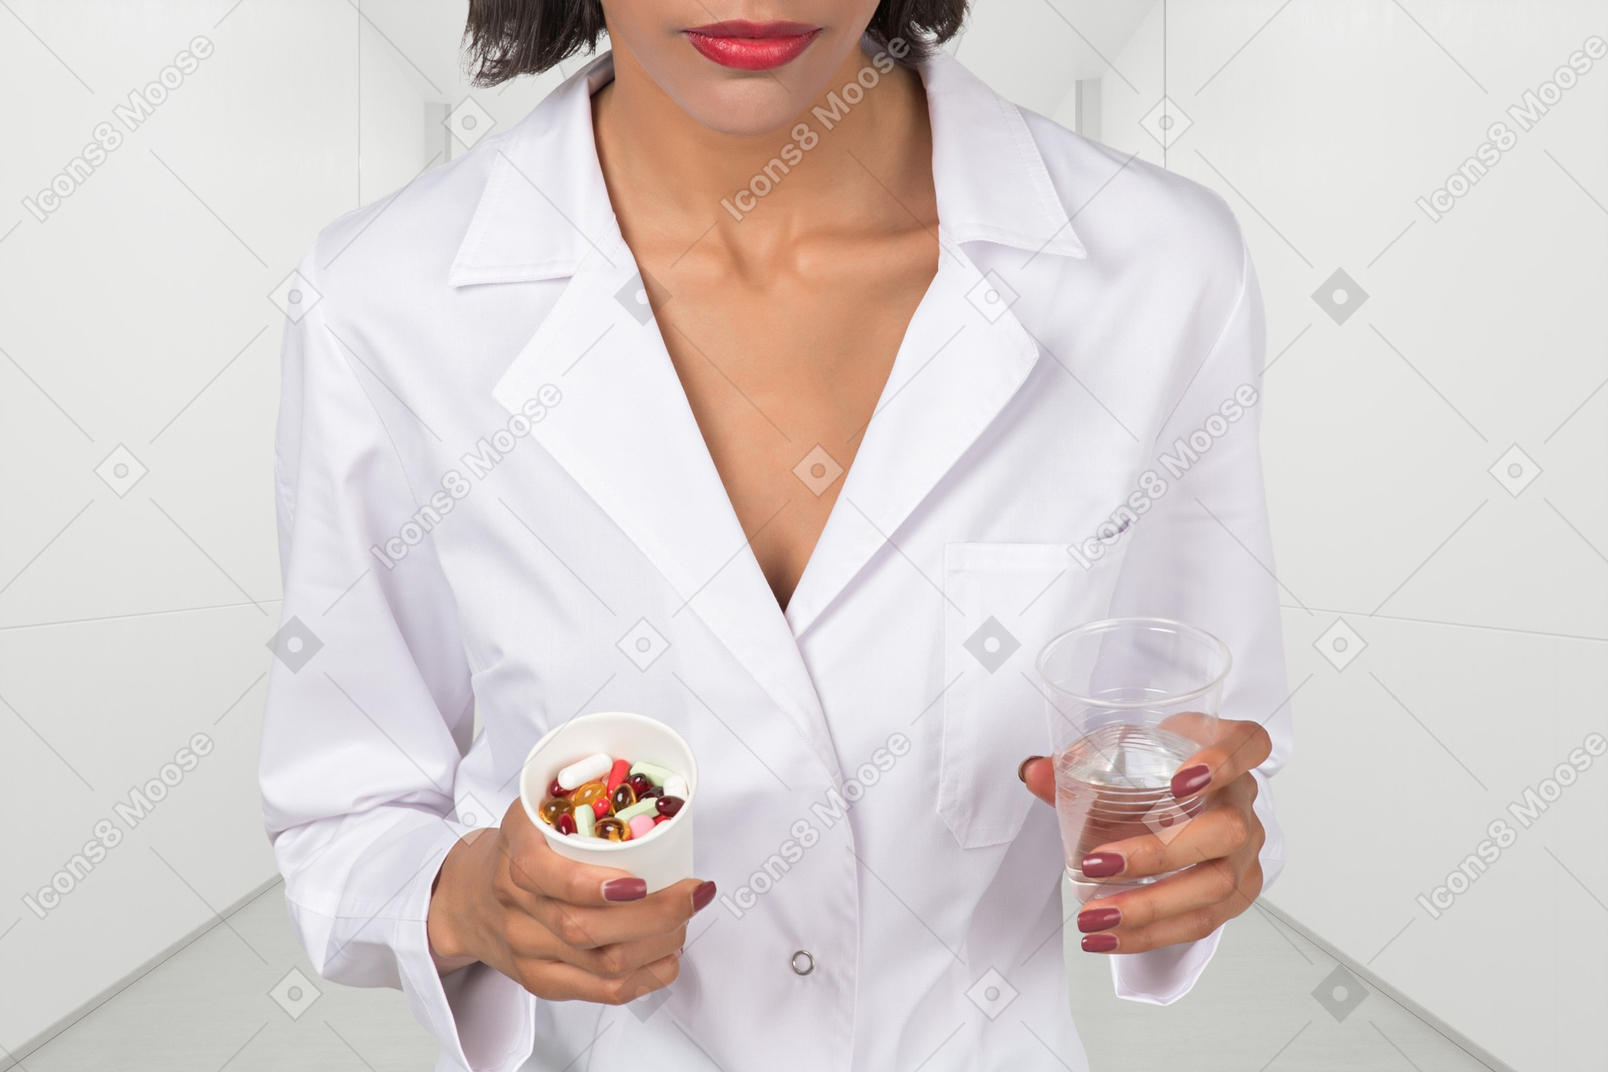 A woman in a white lab coat holding pills and cup of water